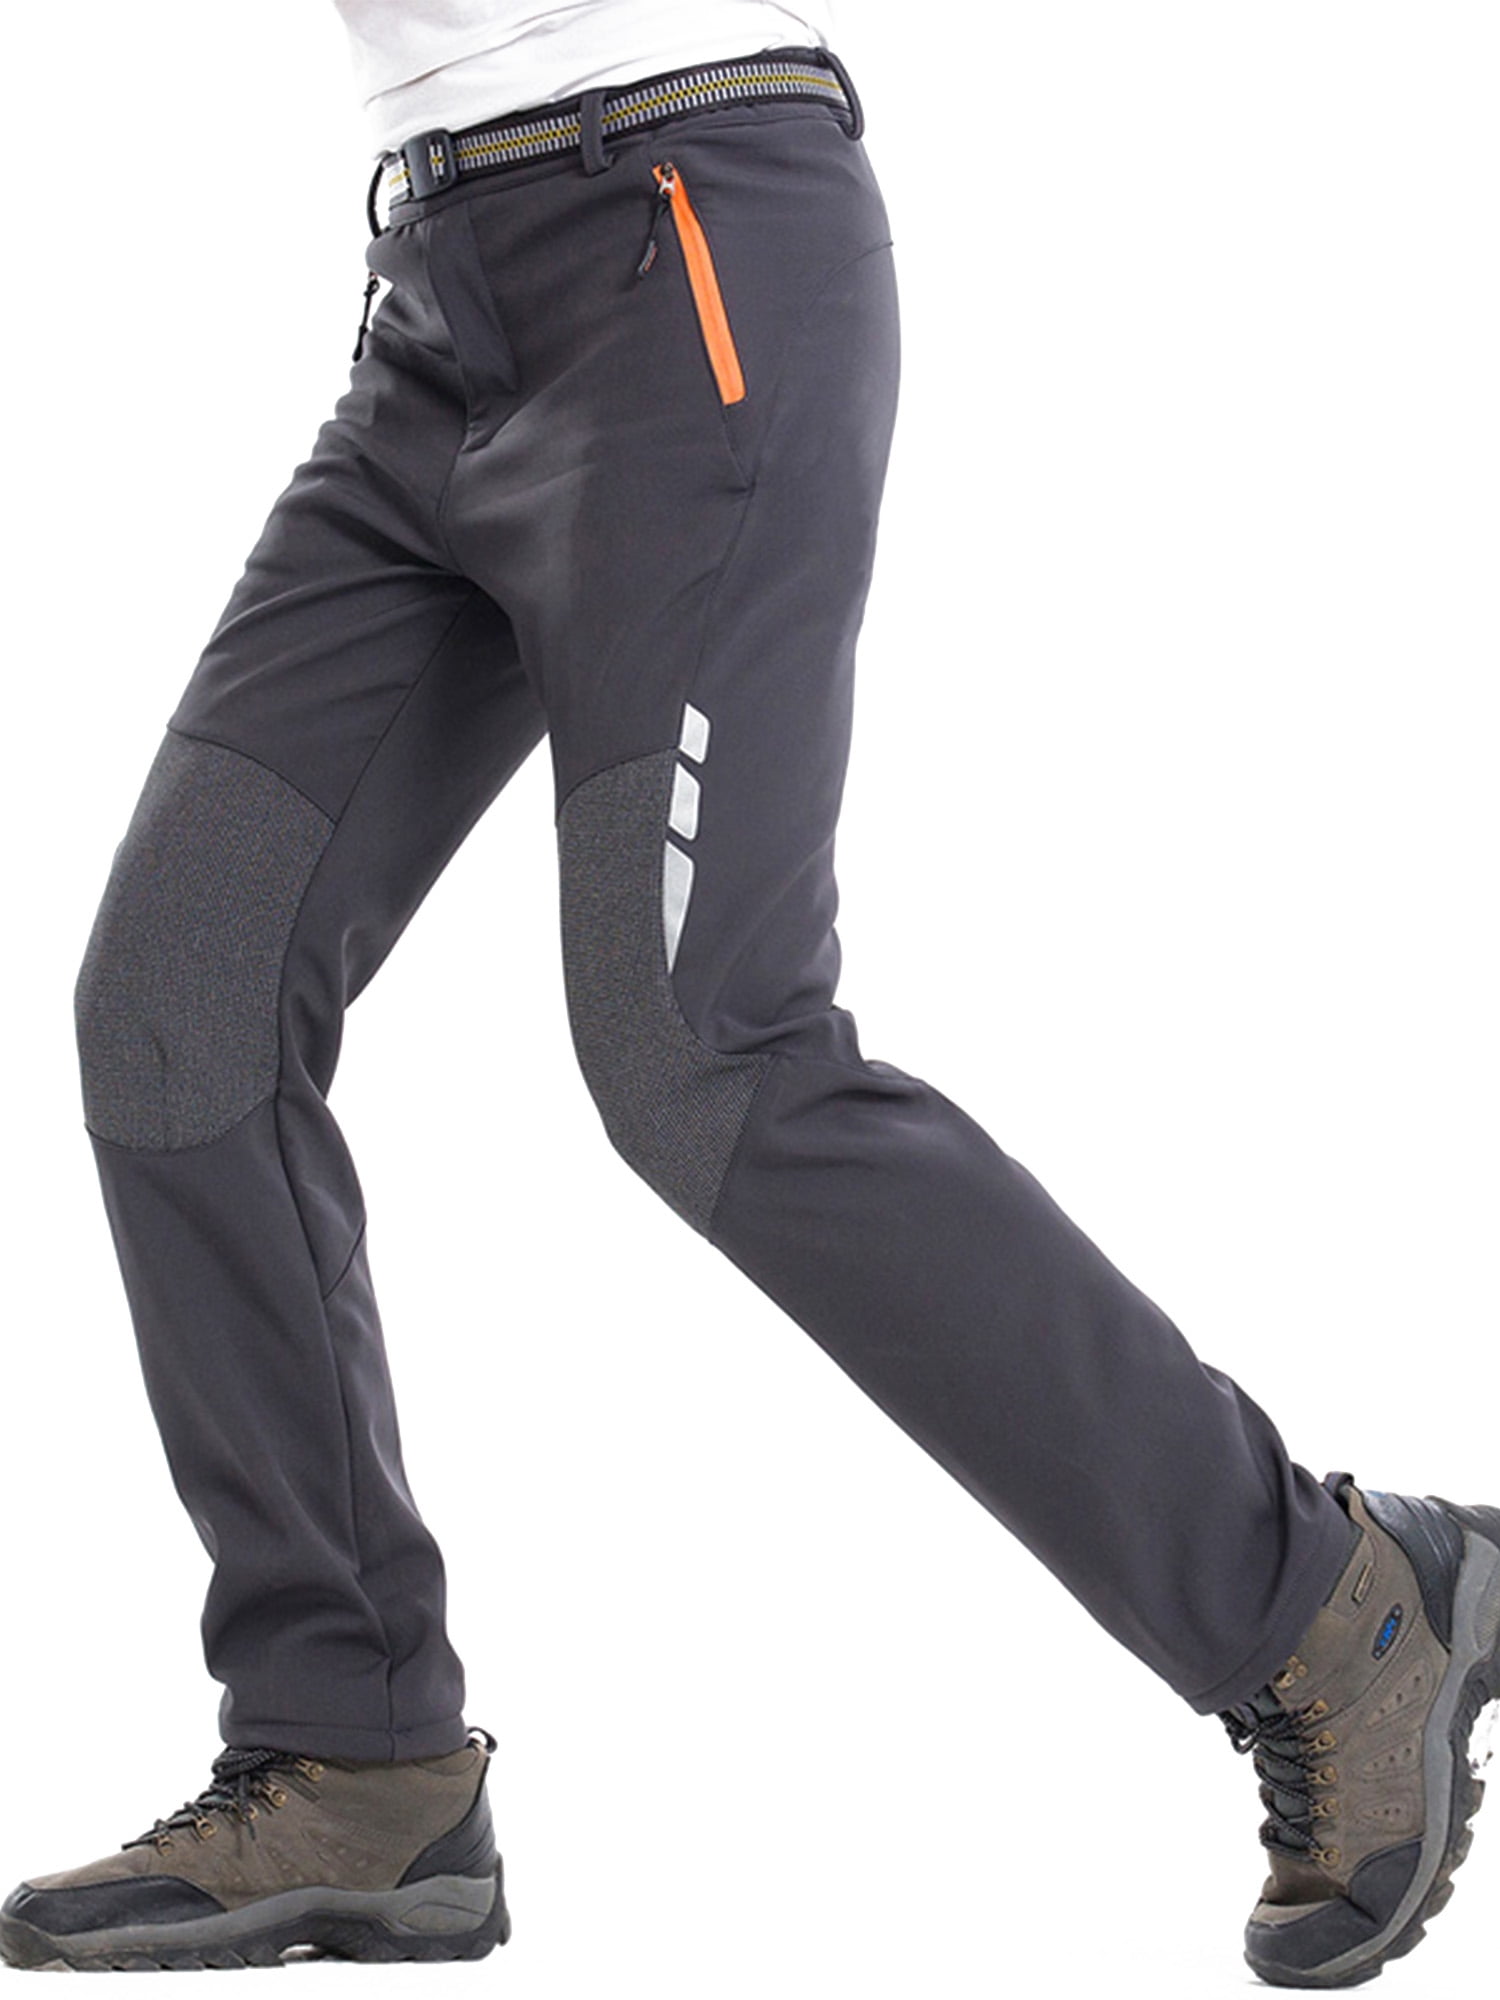 Hiauspor Mens-Fleece-Lined-Hiking-Pants Water Resistant Outdoor Softshell Pant Warm for Winter,Snow Ski